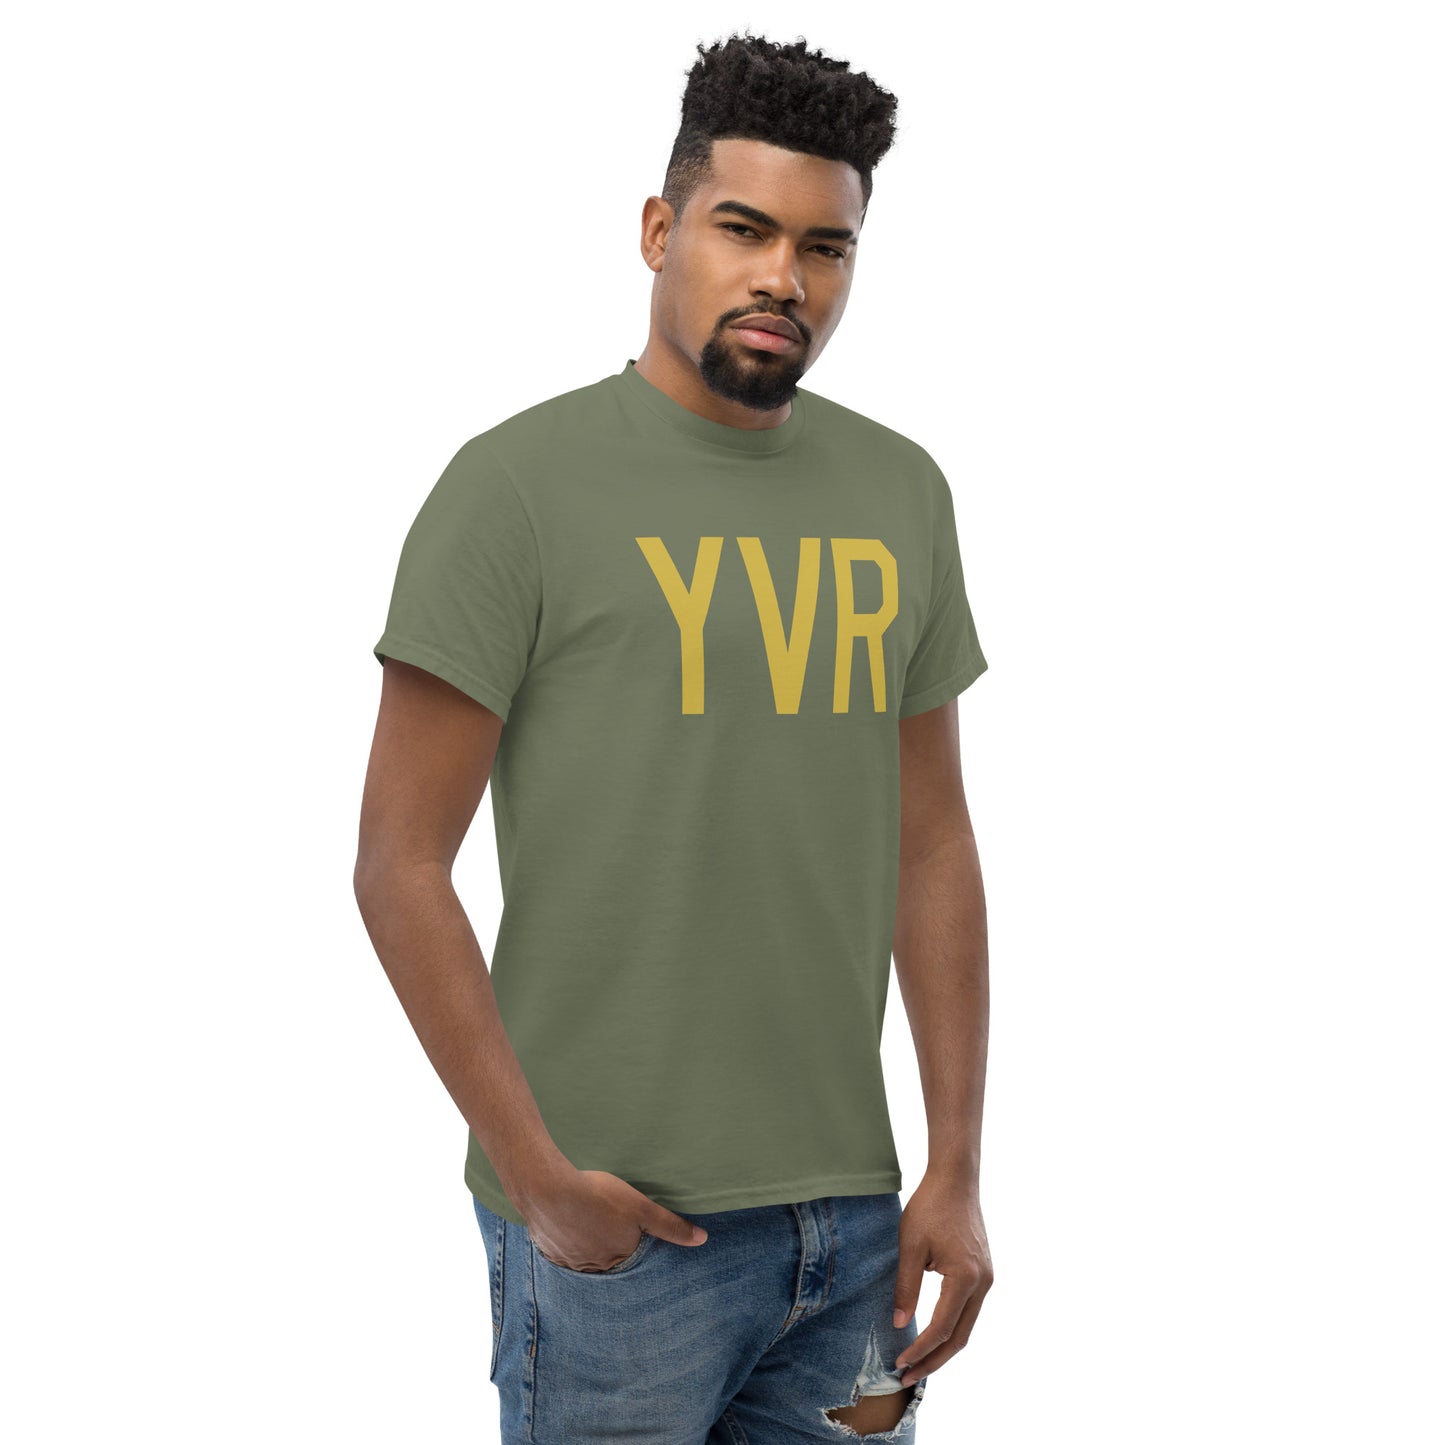 Aviation Enthusiast Men's Tee - Old Gold Graphic • YVR Vancouver • YHM Designs - Image 08